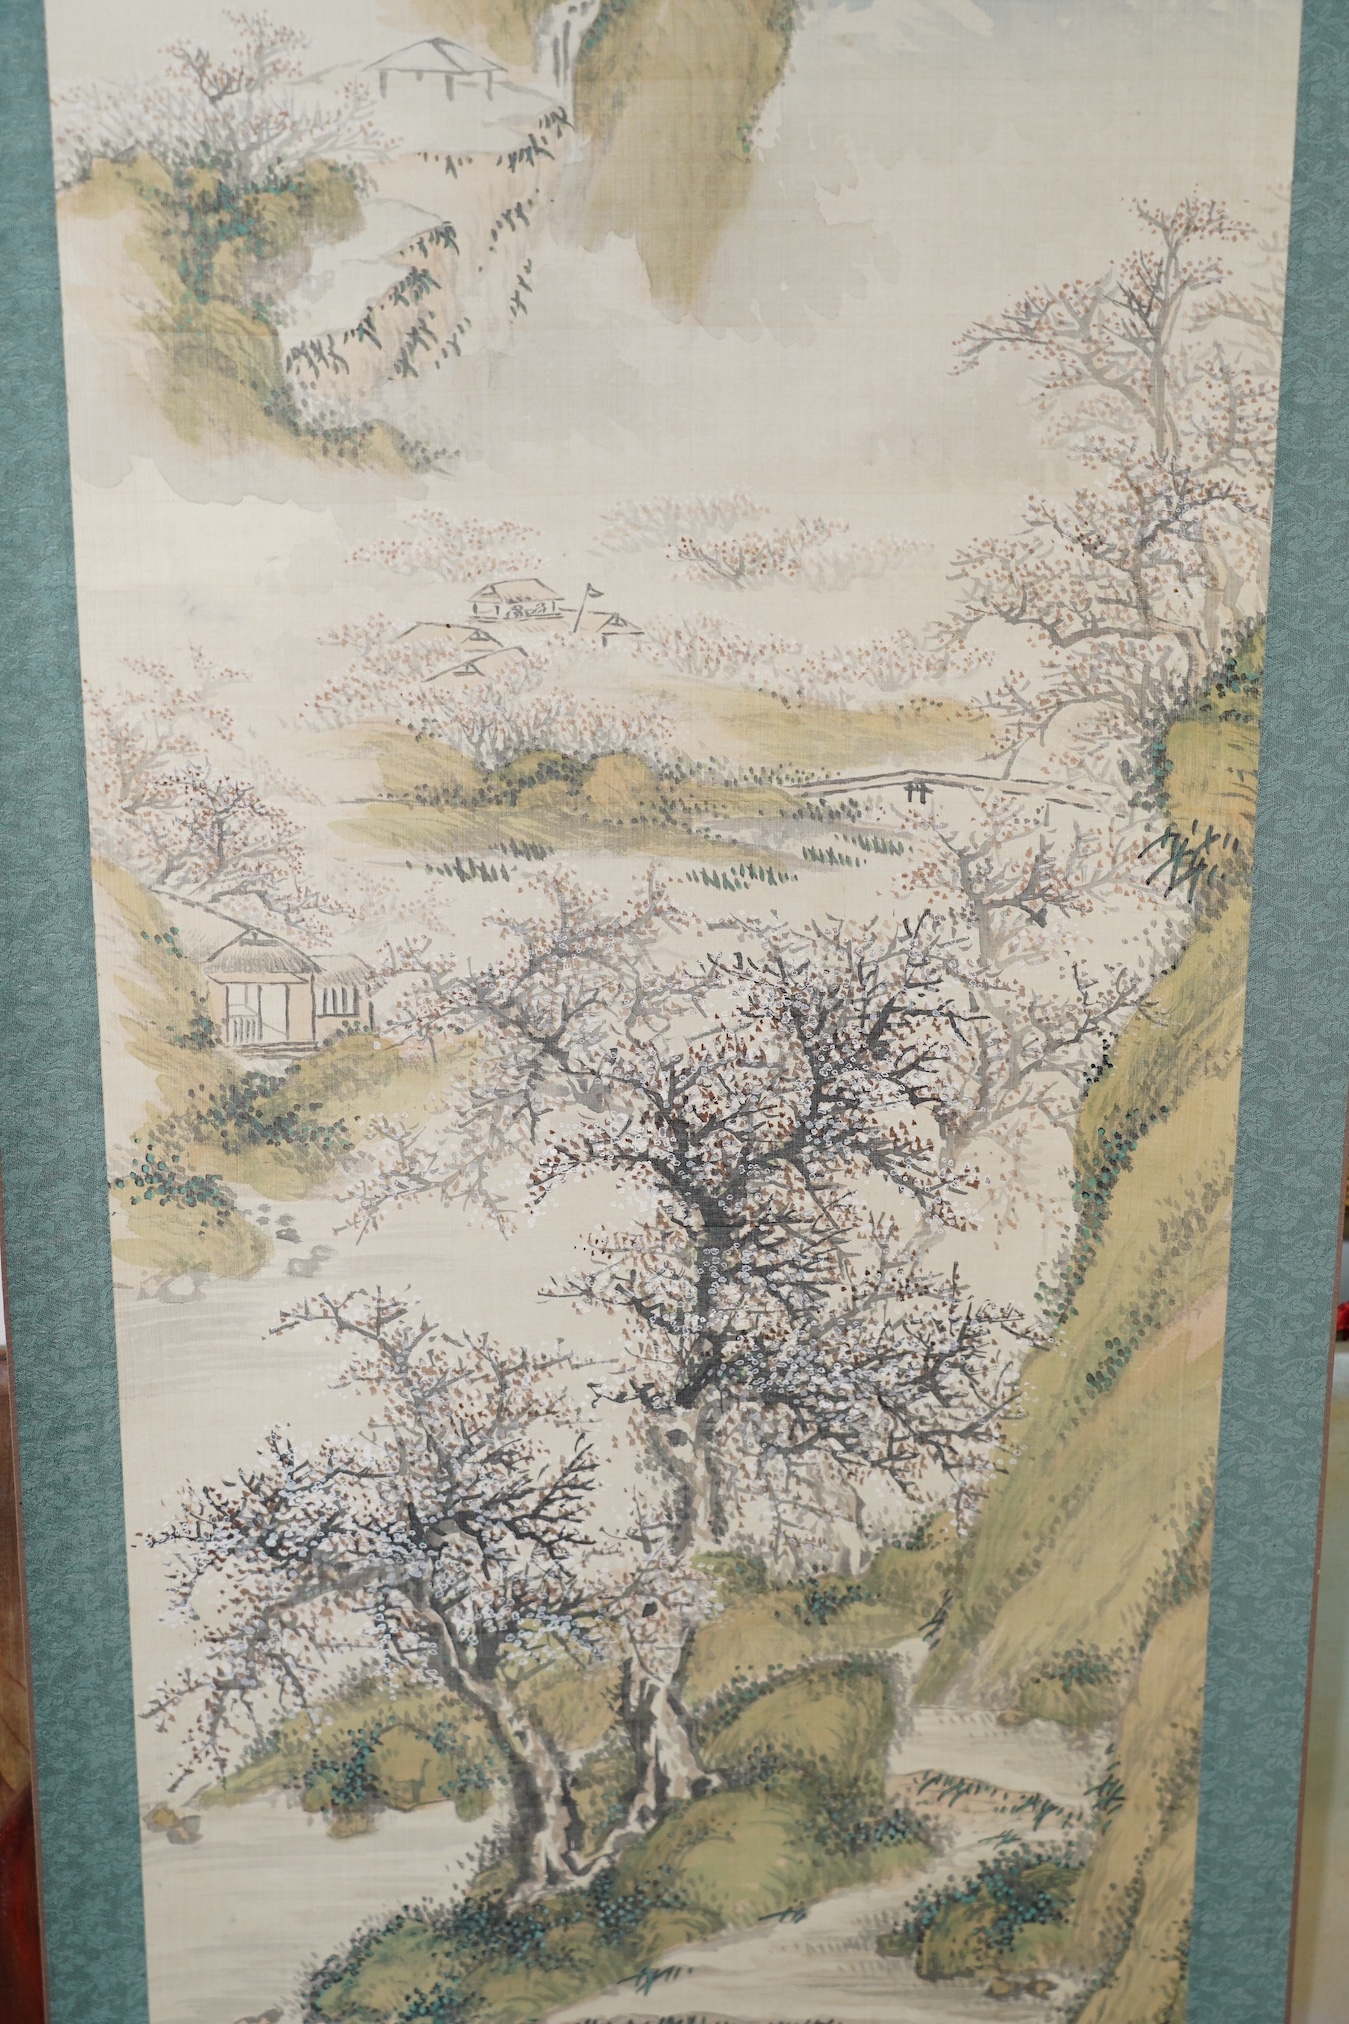 Five Japanese scroll paintings, 19th and 20th century, including two landscapes, birds, a flower study and a calligraphic inscription. Condition - ranging from poor to good